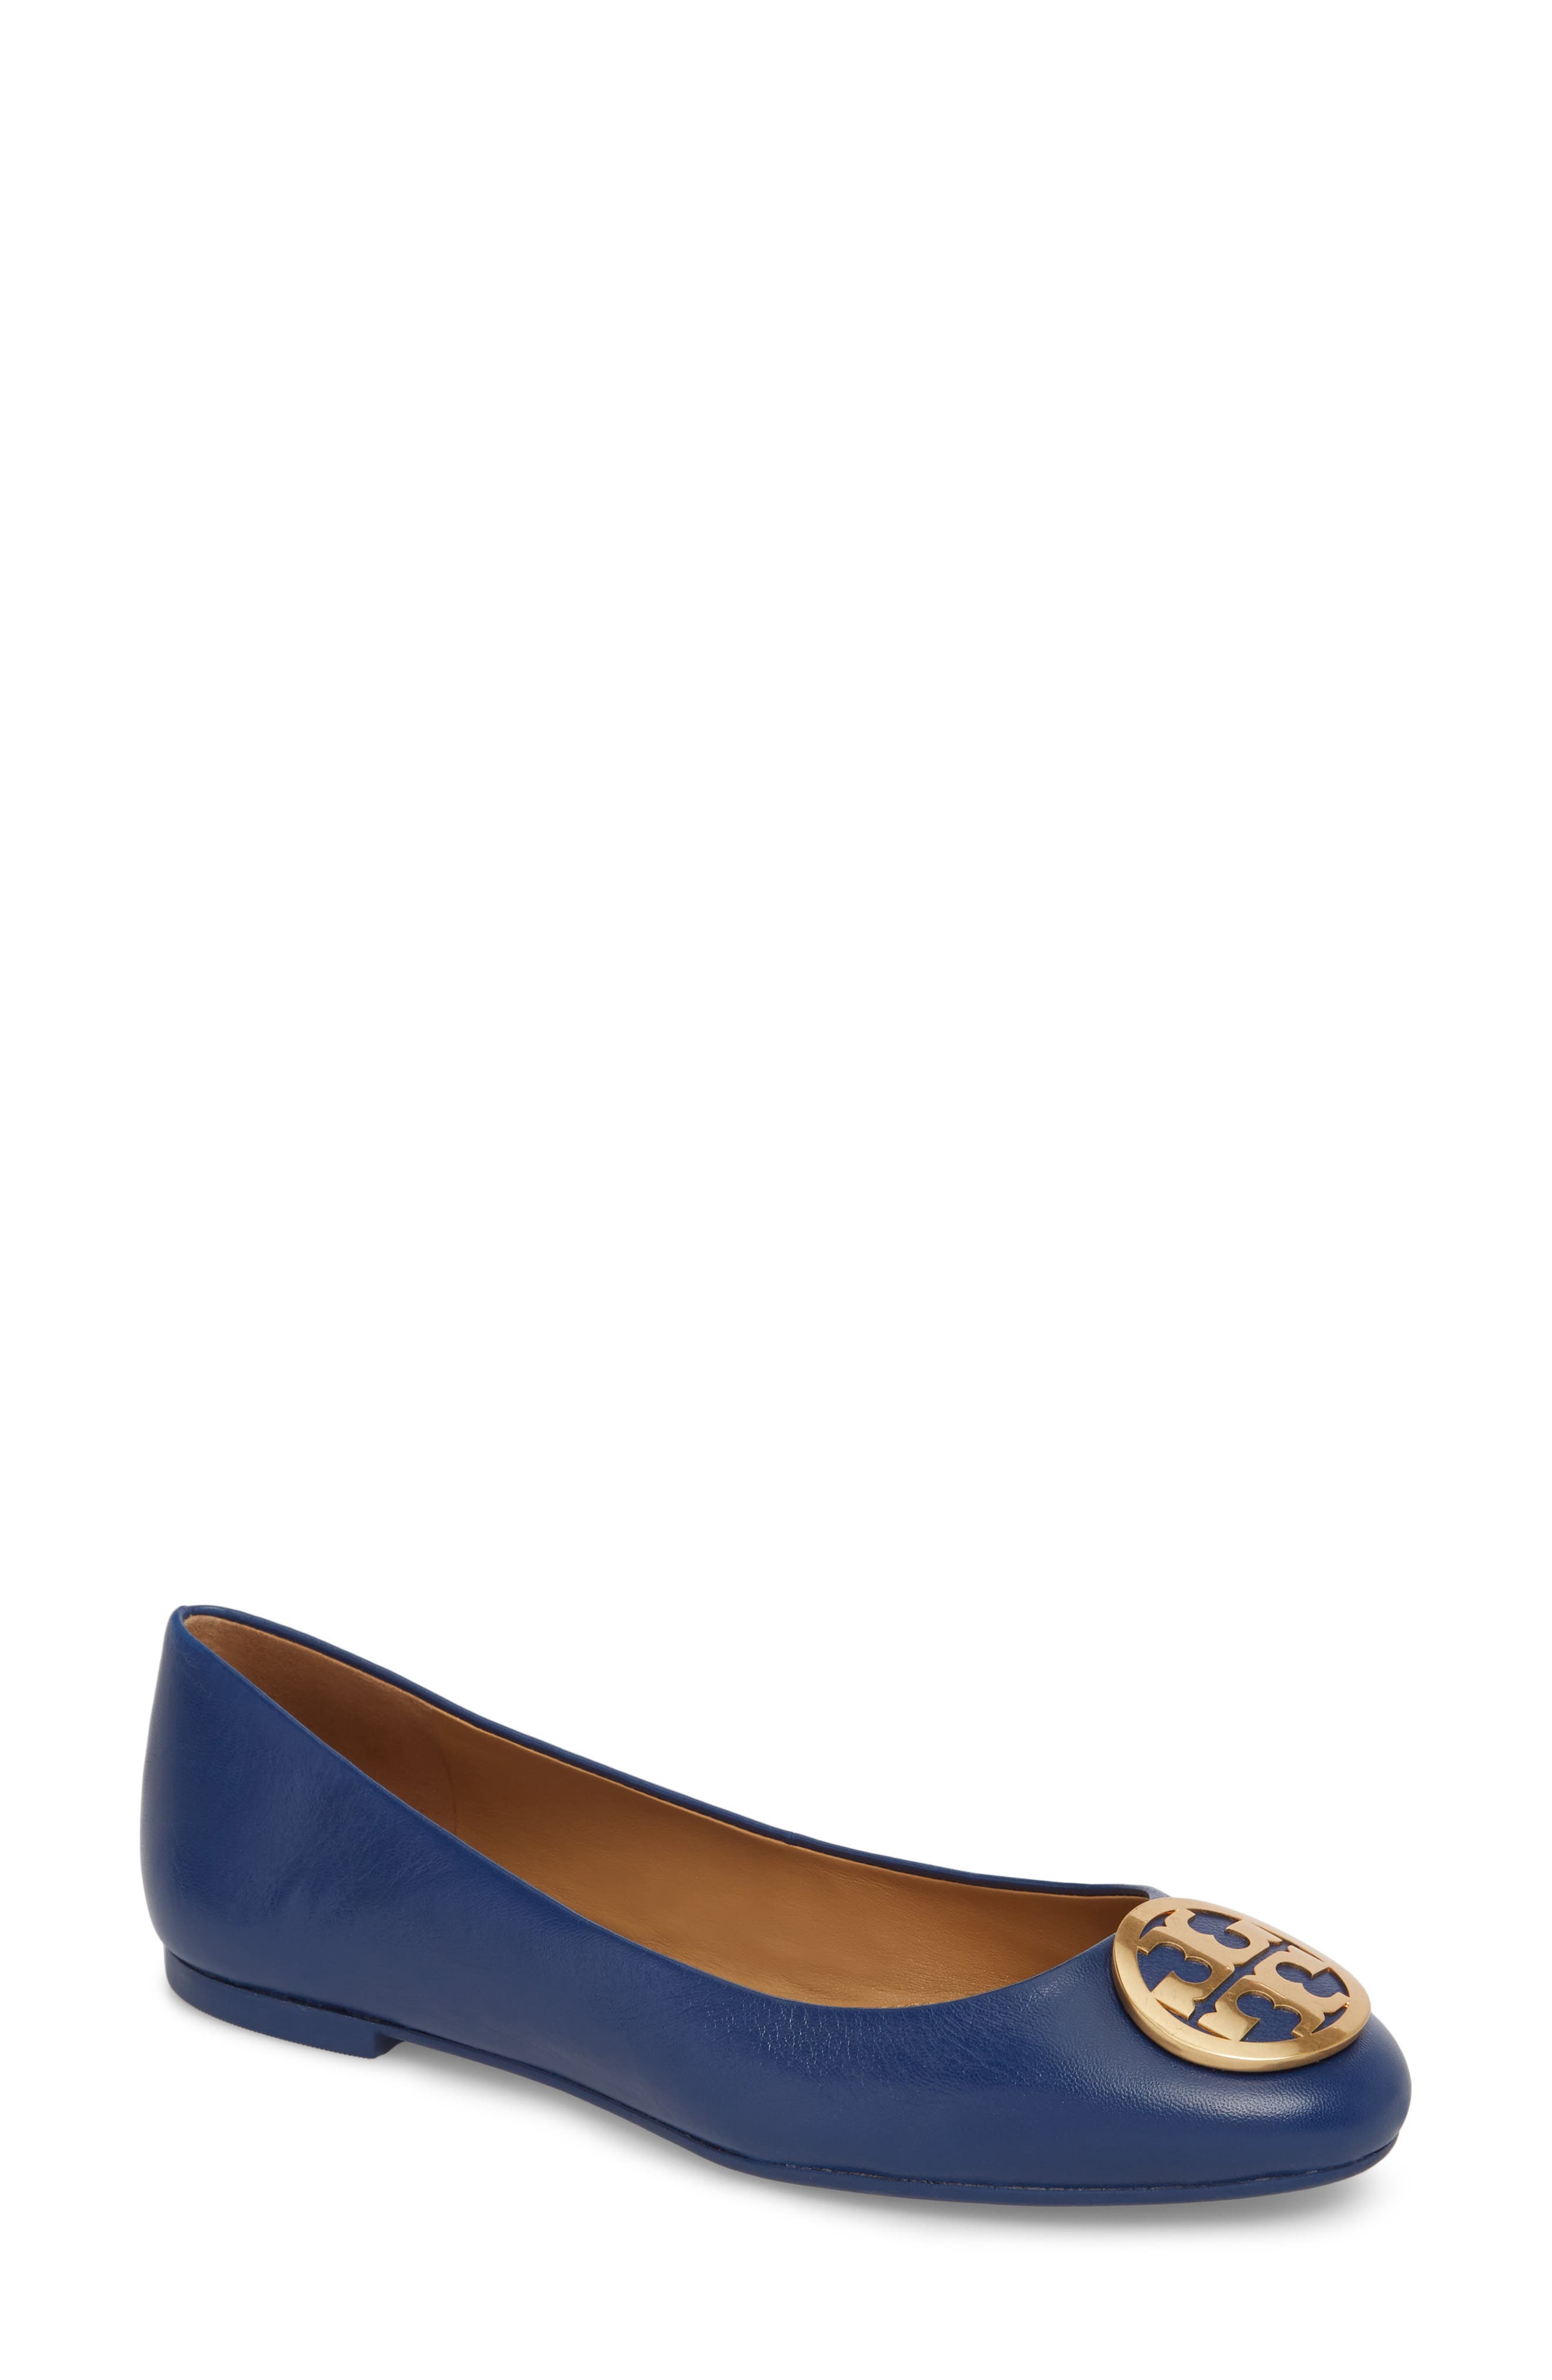 Classic Tory Burch Flats Are $84 Off at the Nordstrom Anniversary Sale